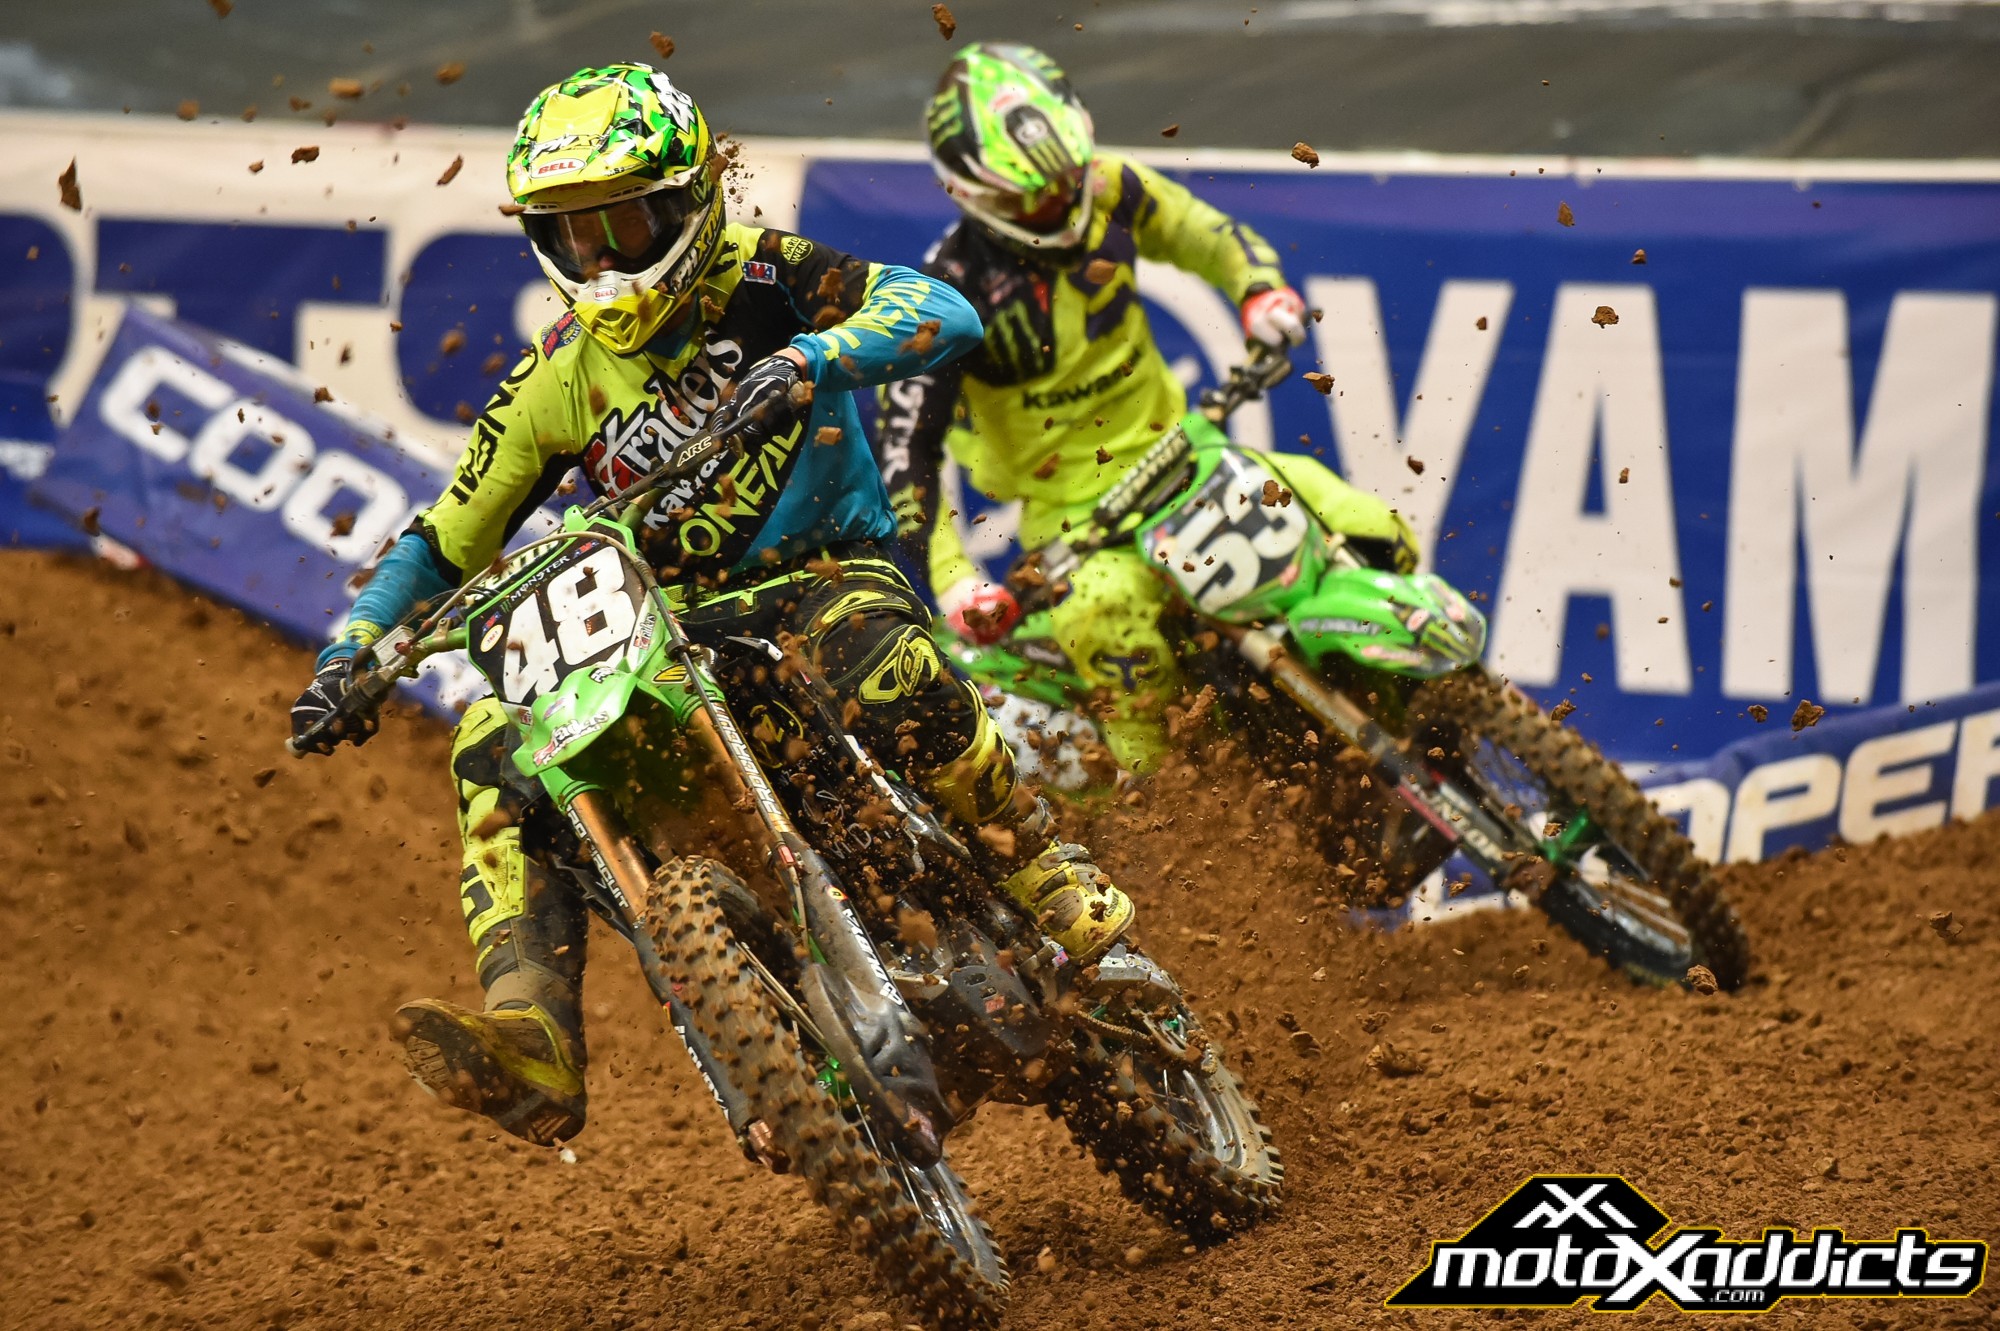 It's got to feel good as a privateer to have the factory Kawasaki behind you. Photo by: CJ Zimmerman